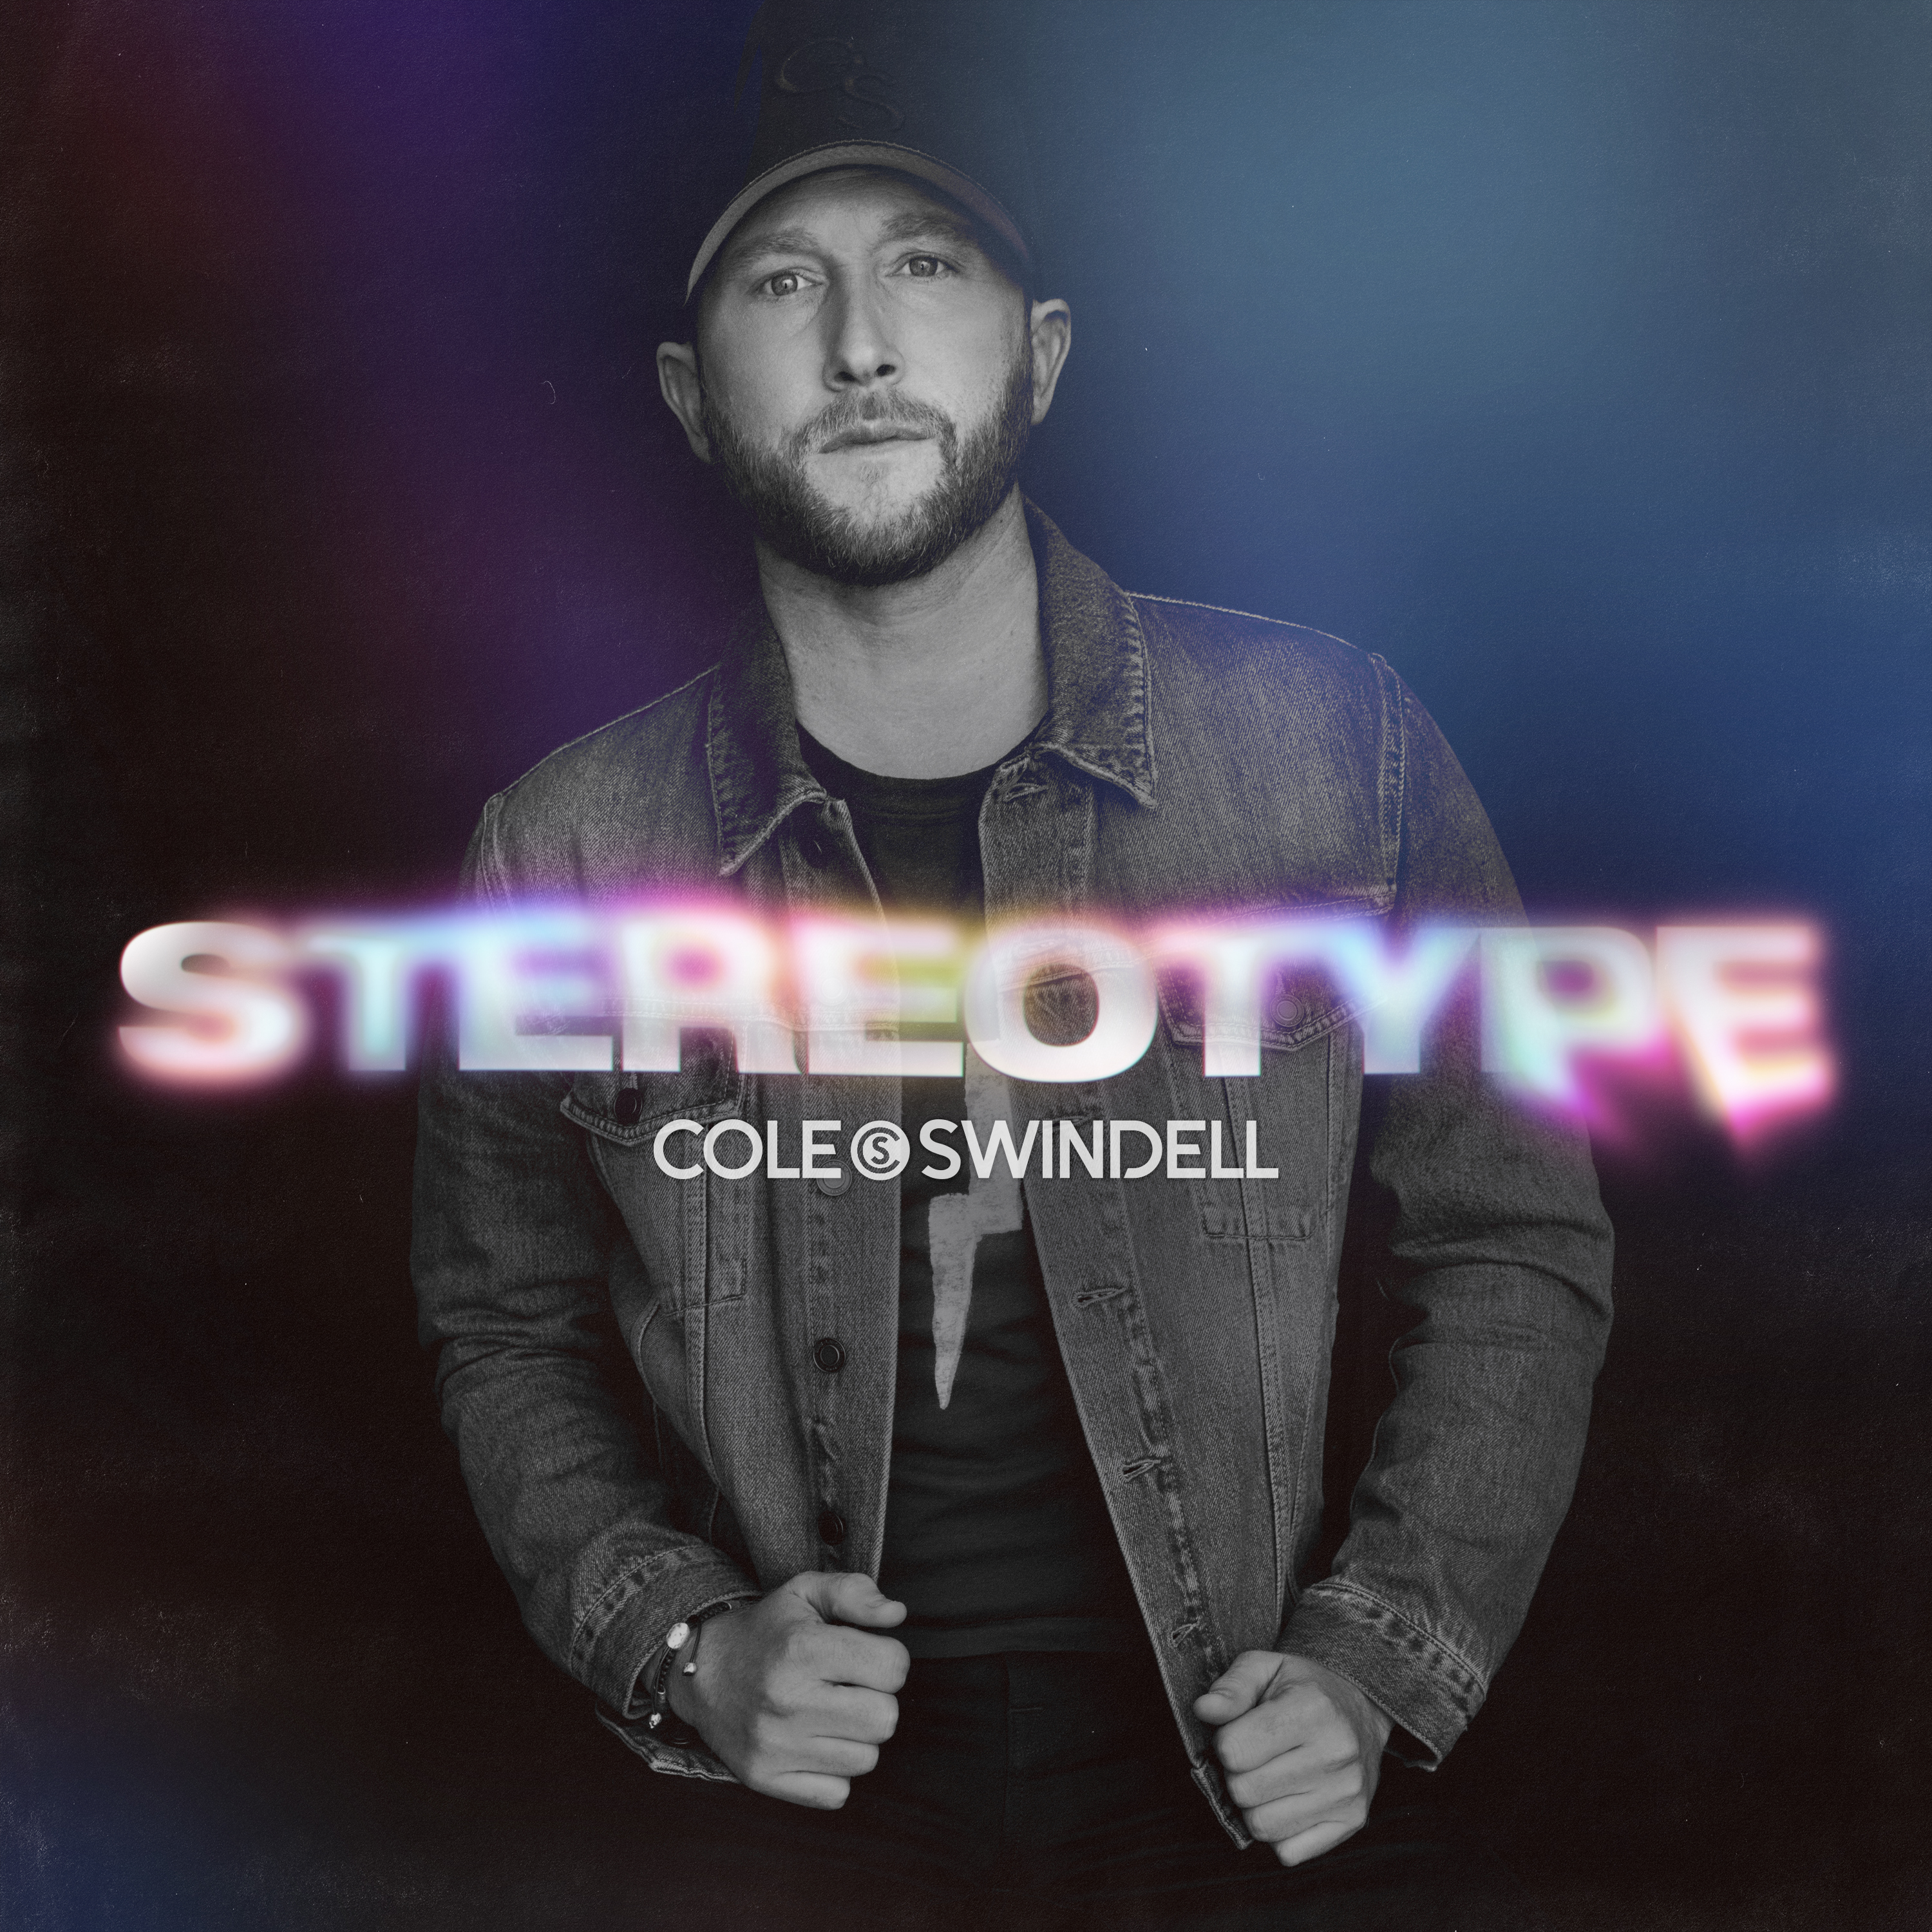 COLE SWINDELL RELEASES THE TITLE TRACK FROM HIS UPCOMING FOURTH STUDIO ALBUM STEREOTYPE